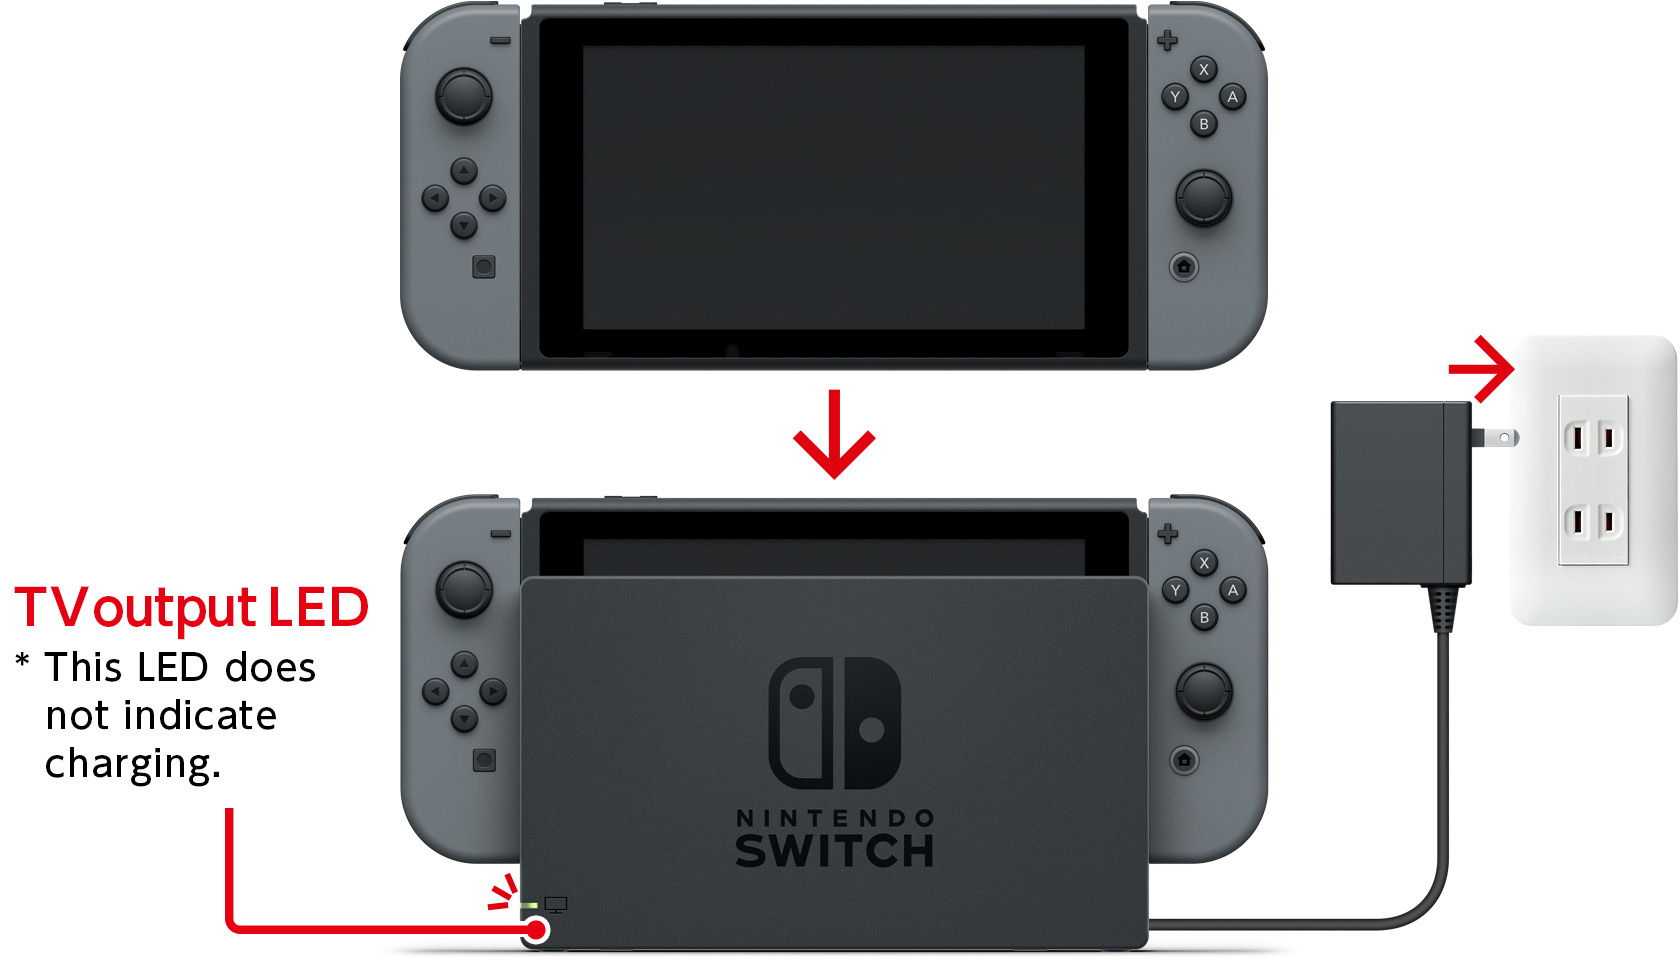 Insert the console into a Nintendo Switch dock to which an AC adapter is connected.